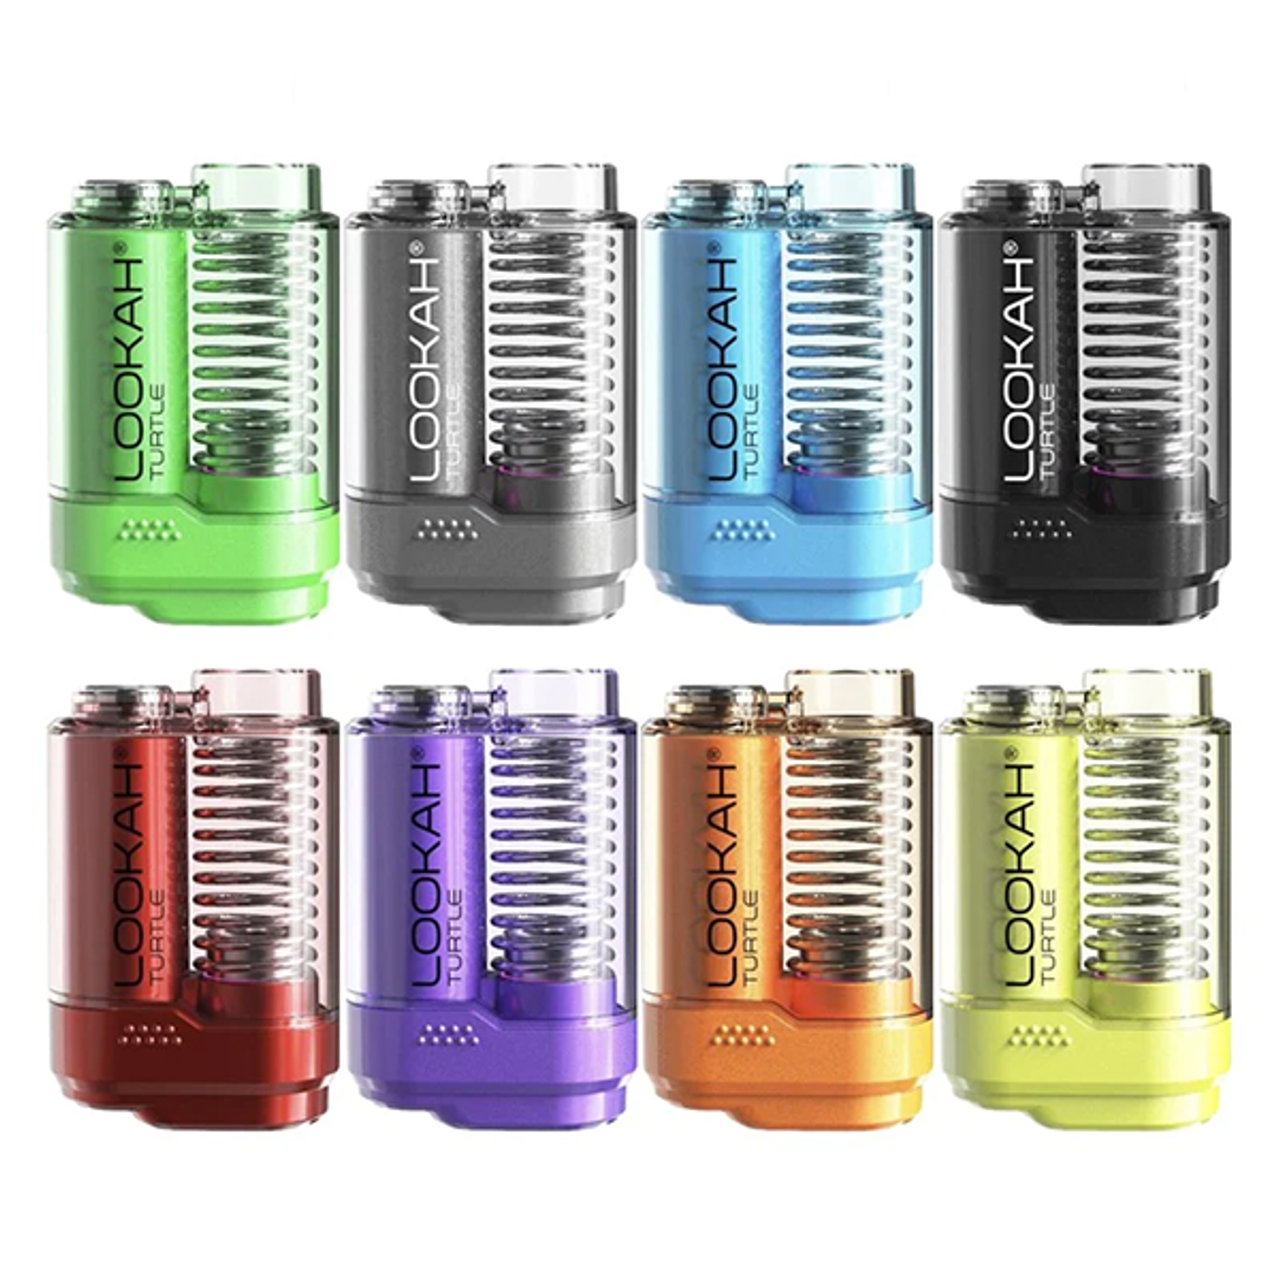 Lookah Turtle 400mAh Variable Voltage 510 Battery - Assorted Colors